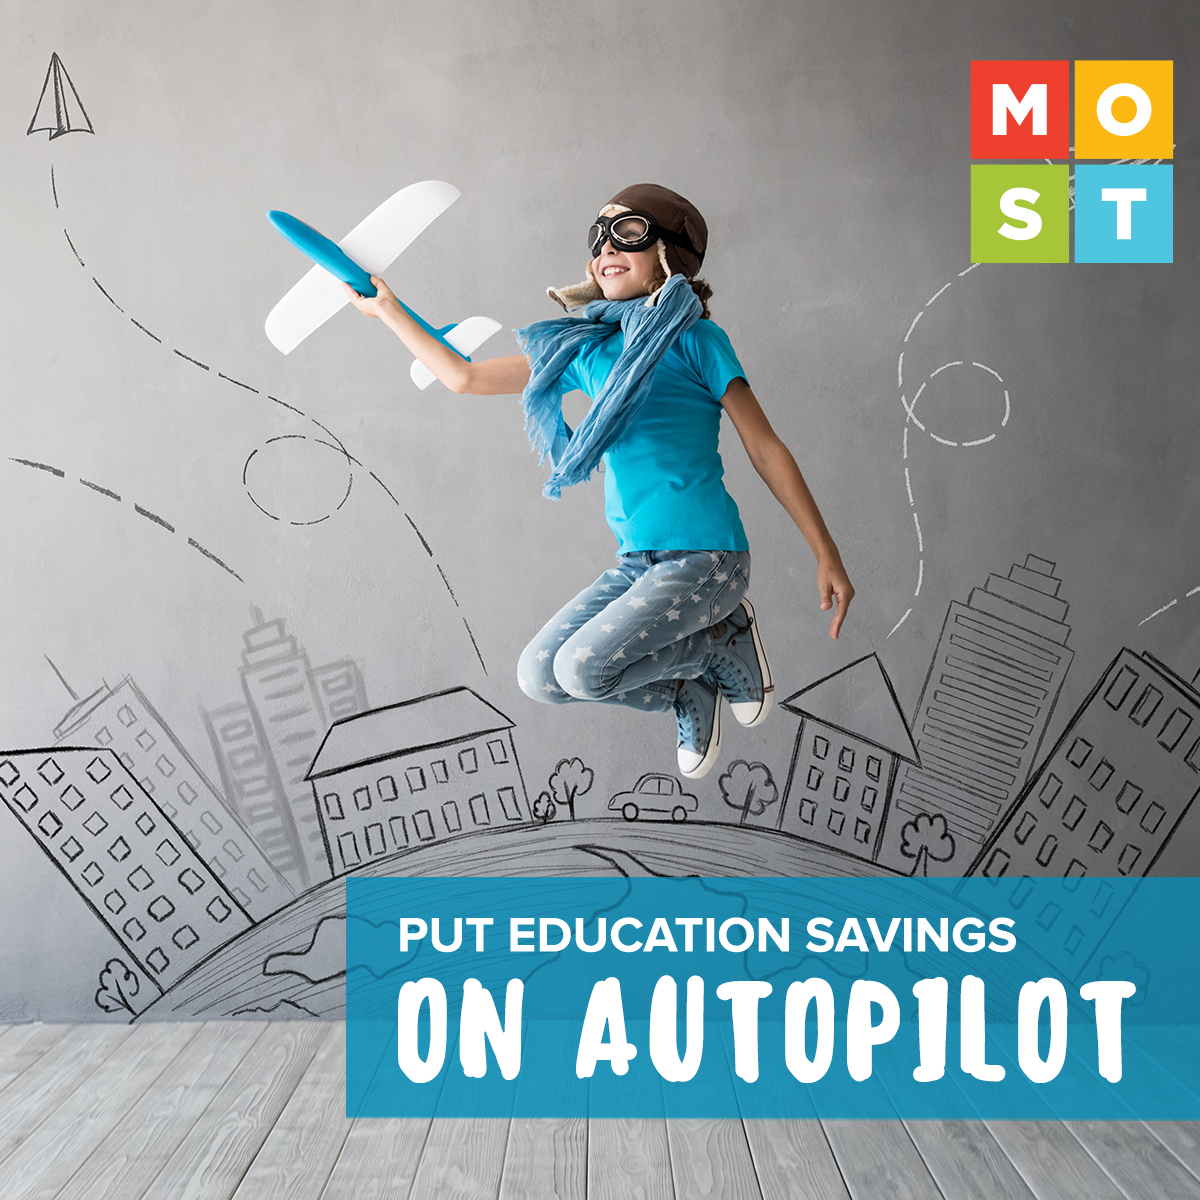 Automatic contributions to your MOST 529 account make it easy to stay on track with savings goals may help set your child up for success. Talk about a win-win. 🏆 Get started at missourimost.org/home/529-featu…